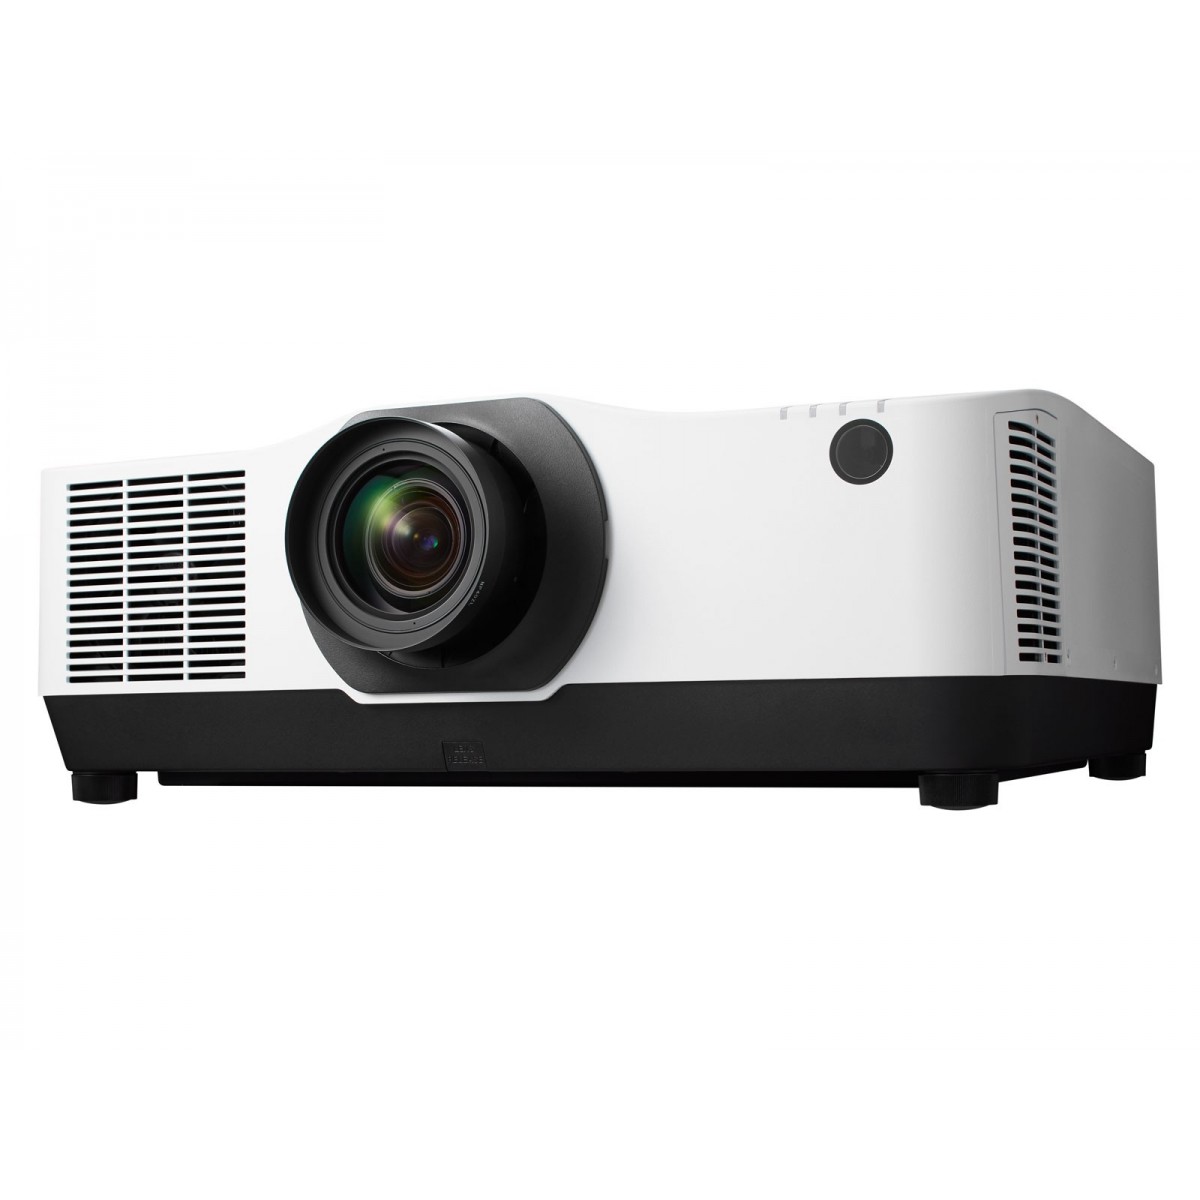 PA804UL-WH Projector - Installation Projector, WUXGA , 8000Lm, LCD, Laser Light Source, white cabinet